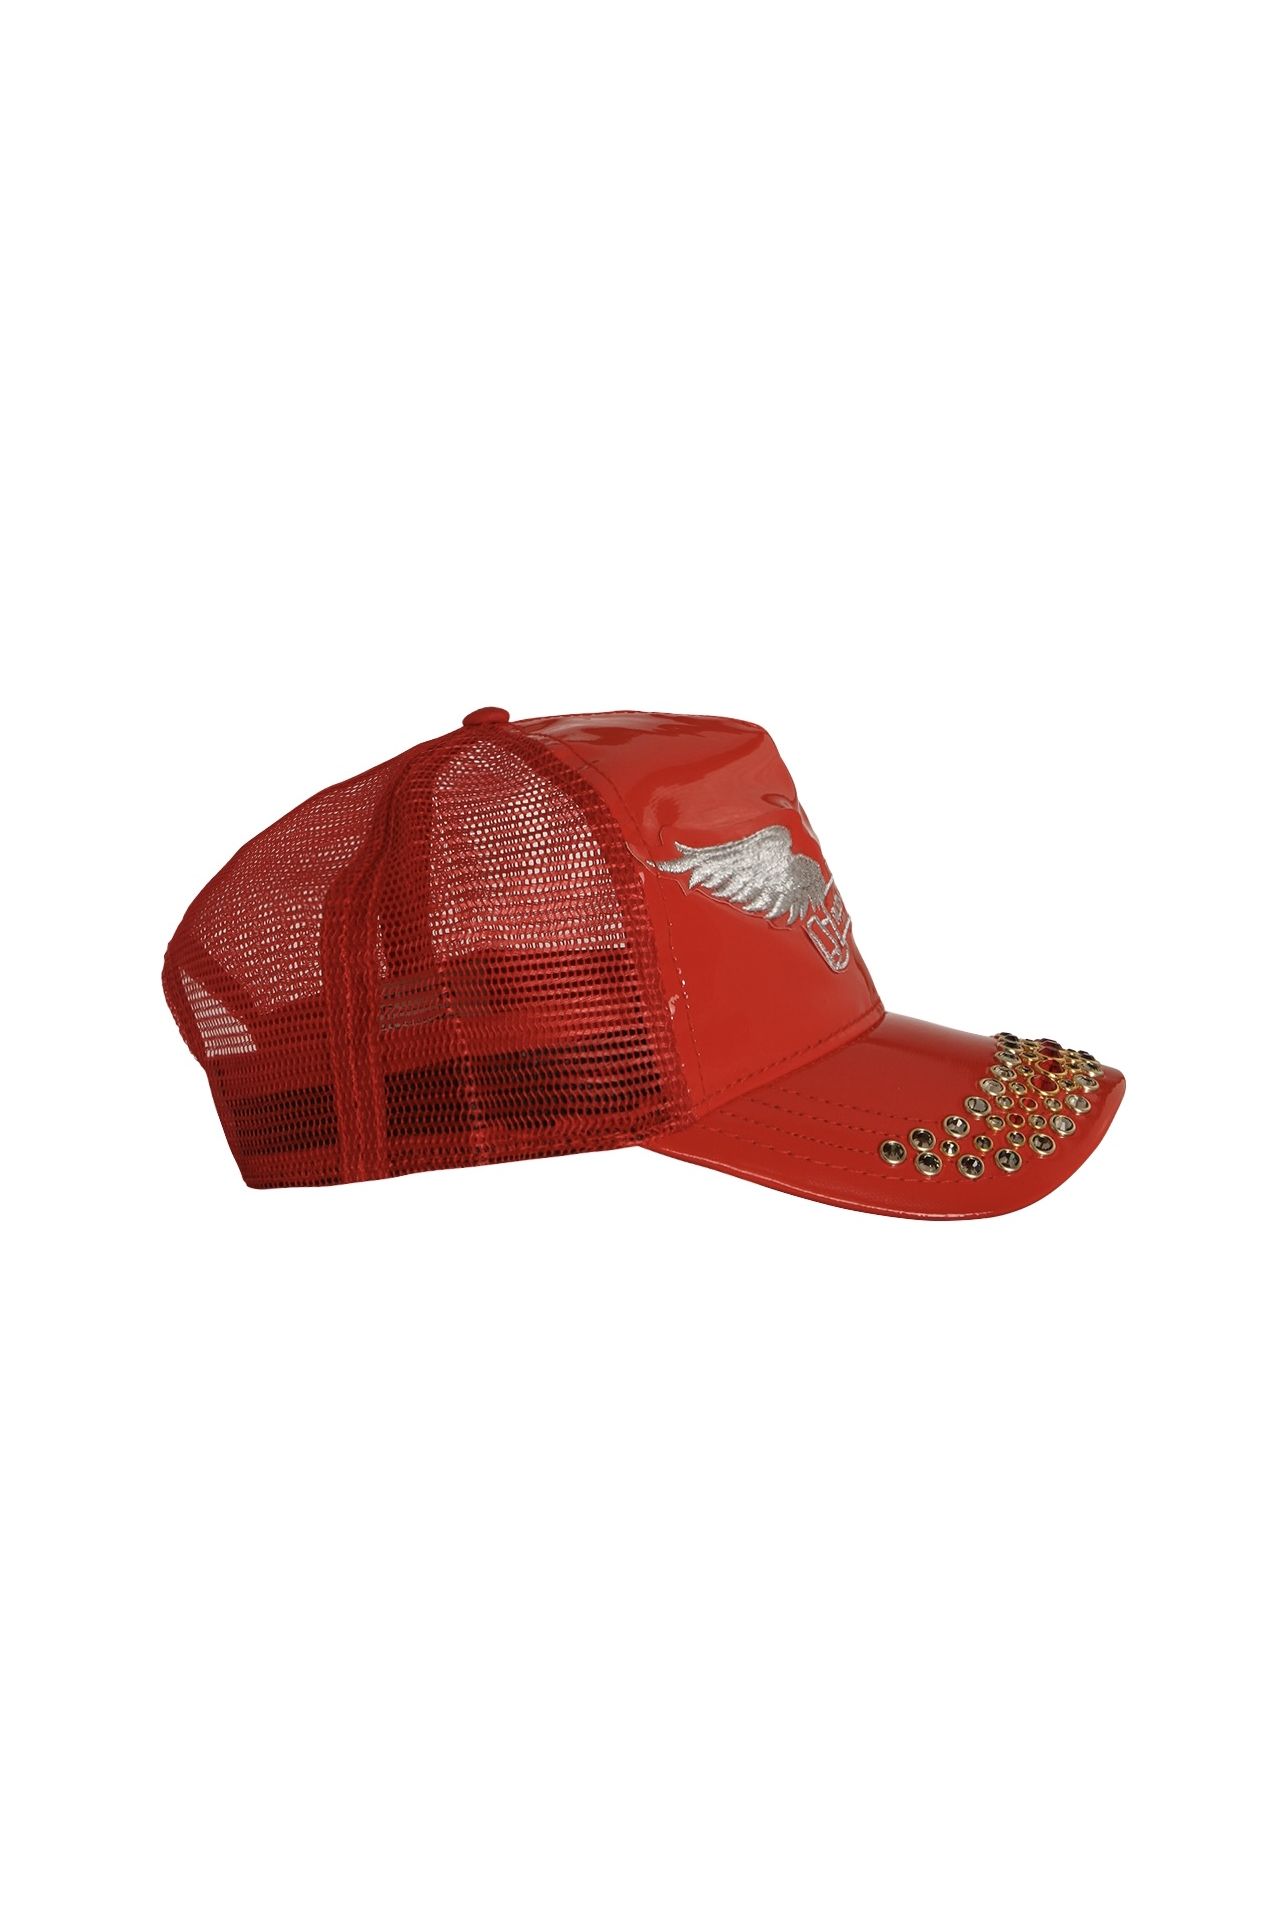 TRUCKER CAP IN PATENT RED WITH SILVER WINGS AND CRYSTALS